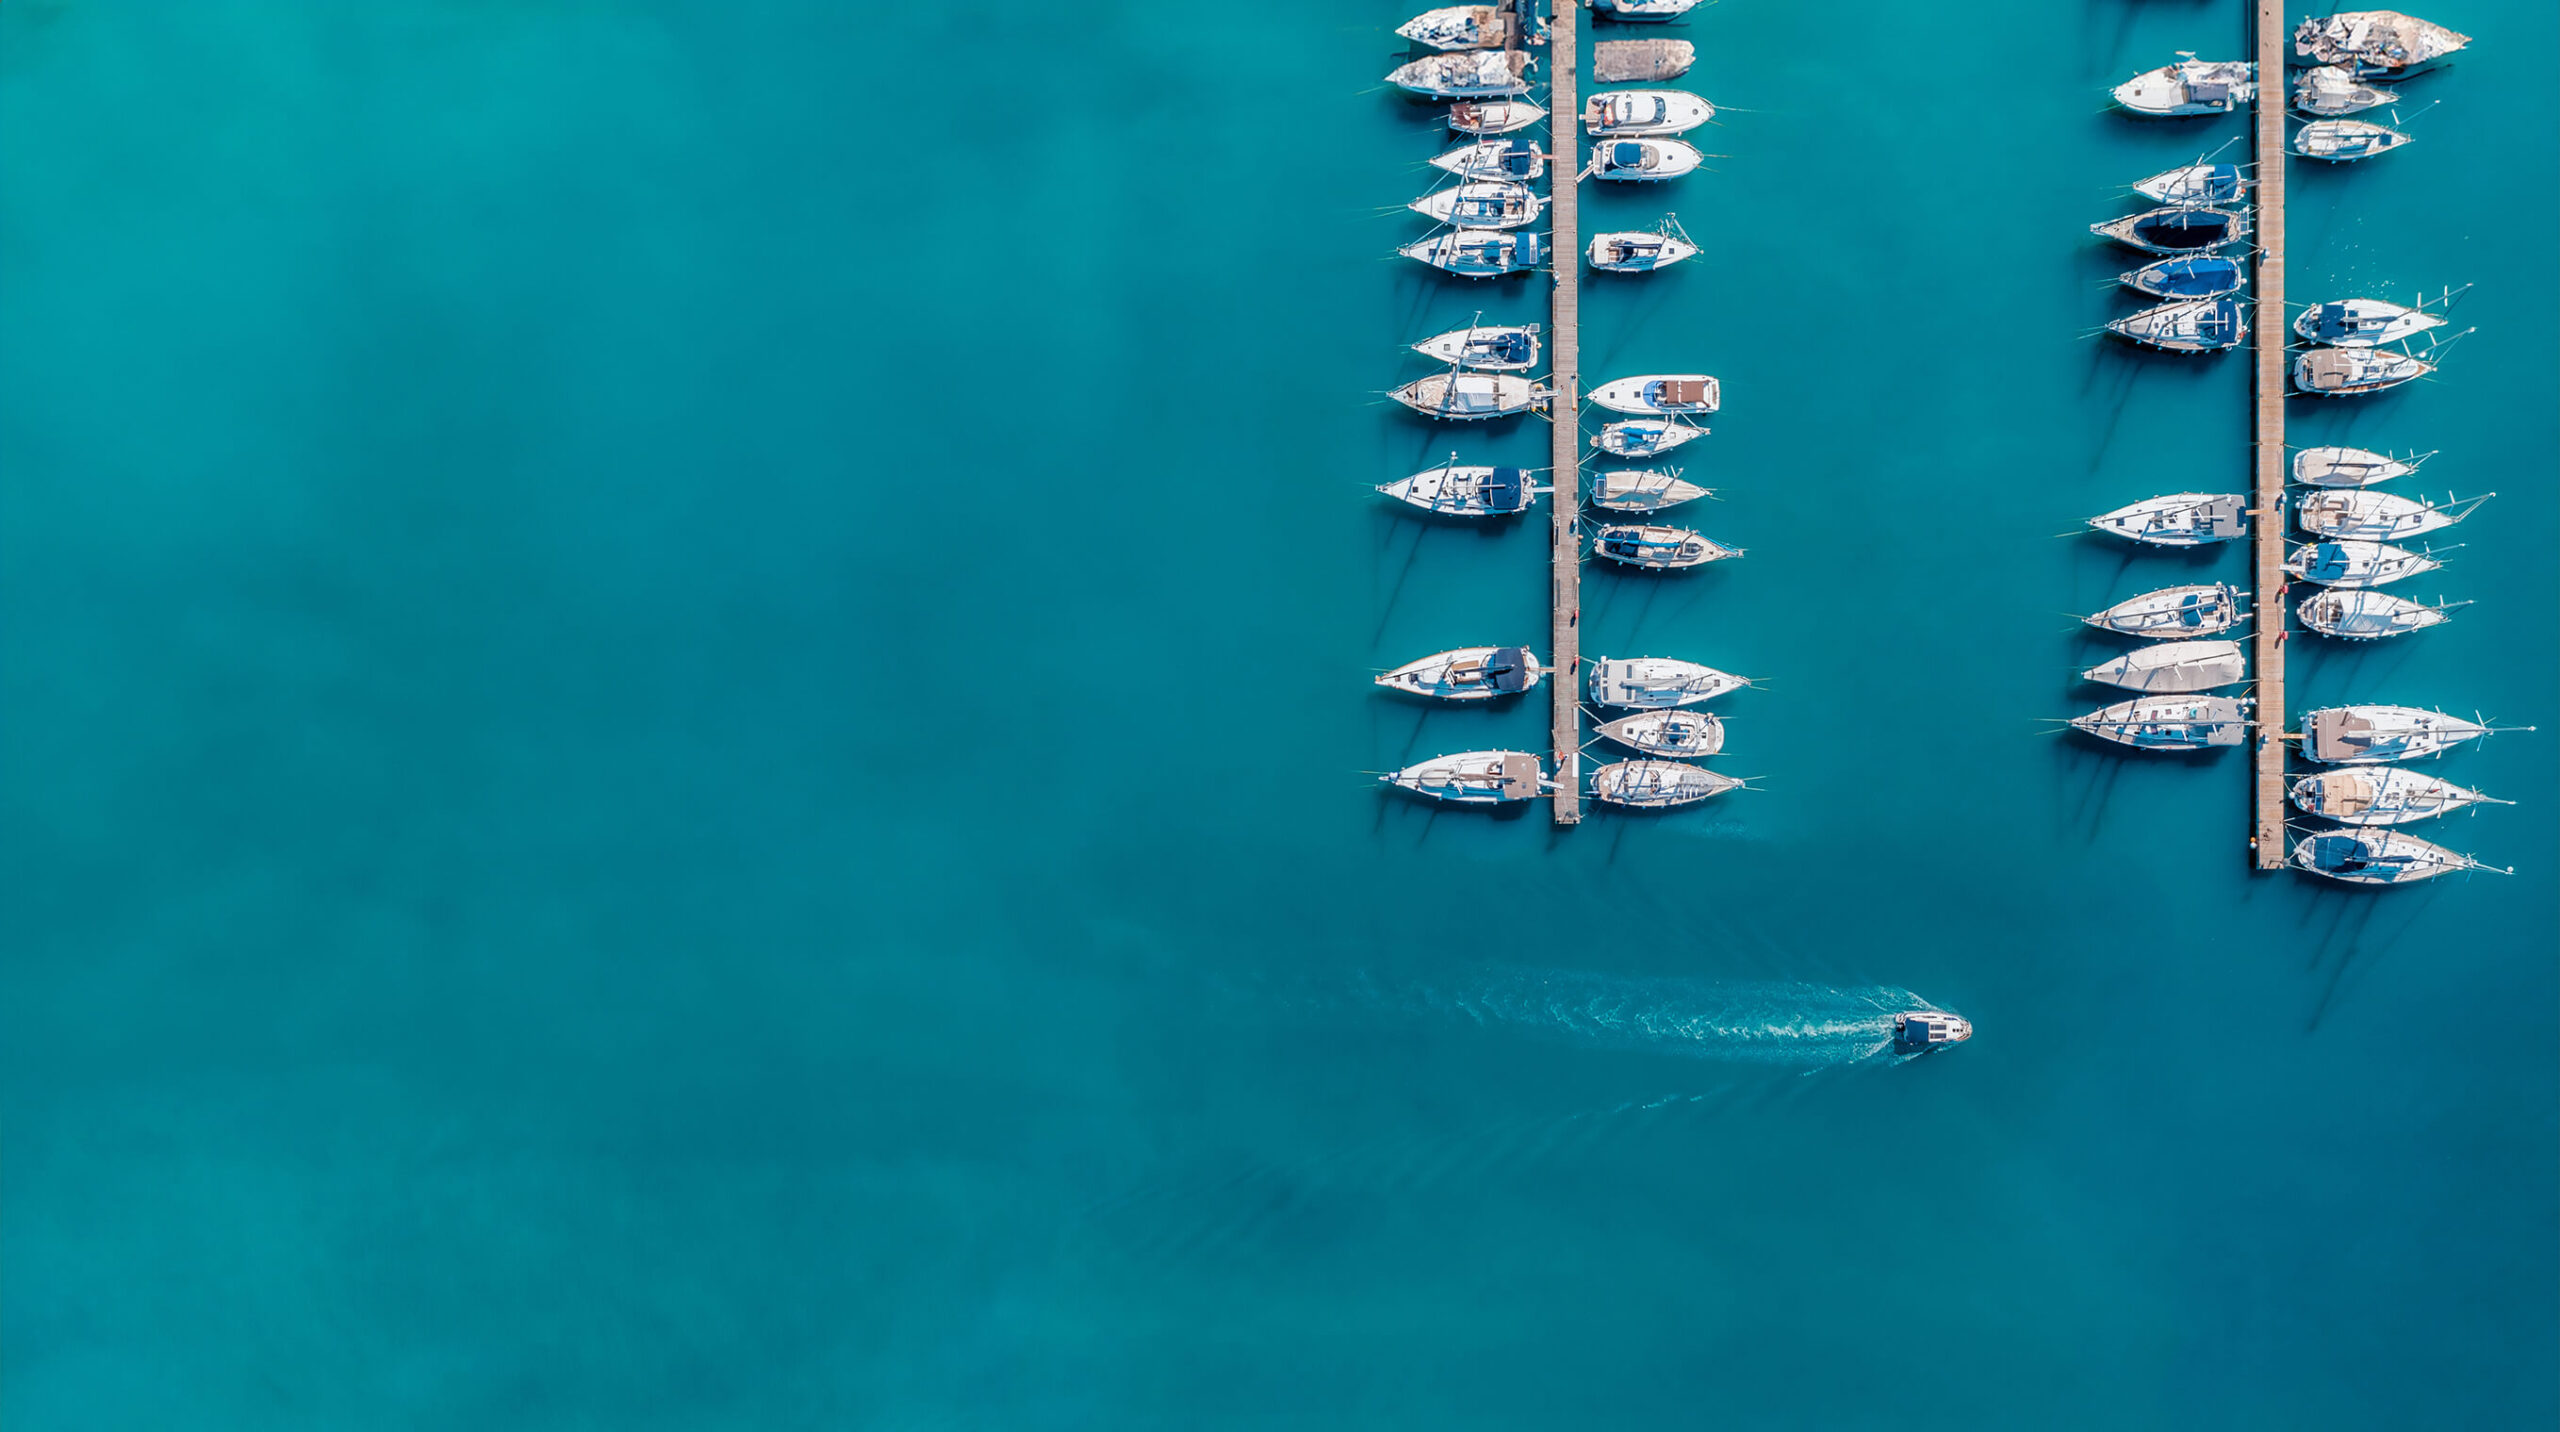 Overhead view of boats docked